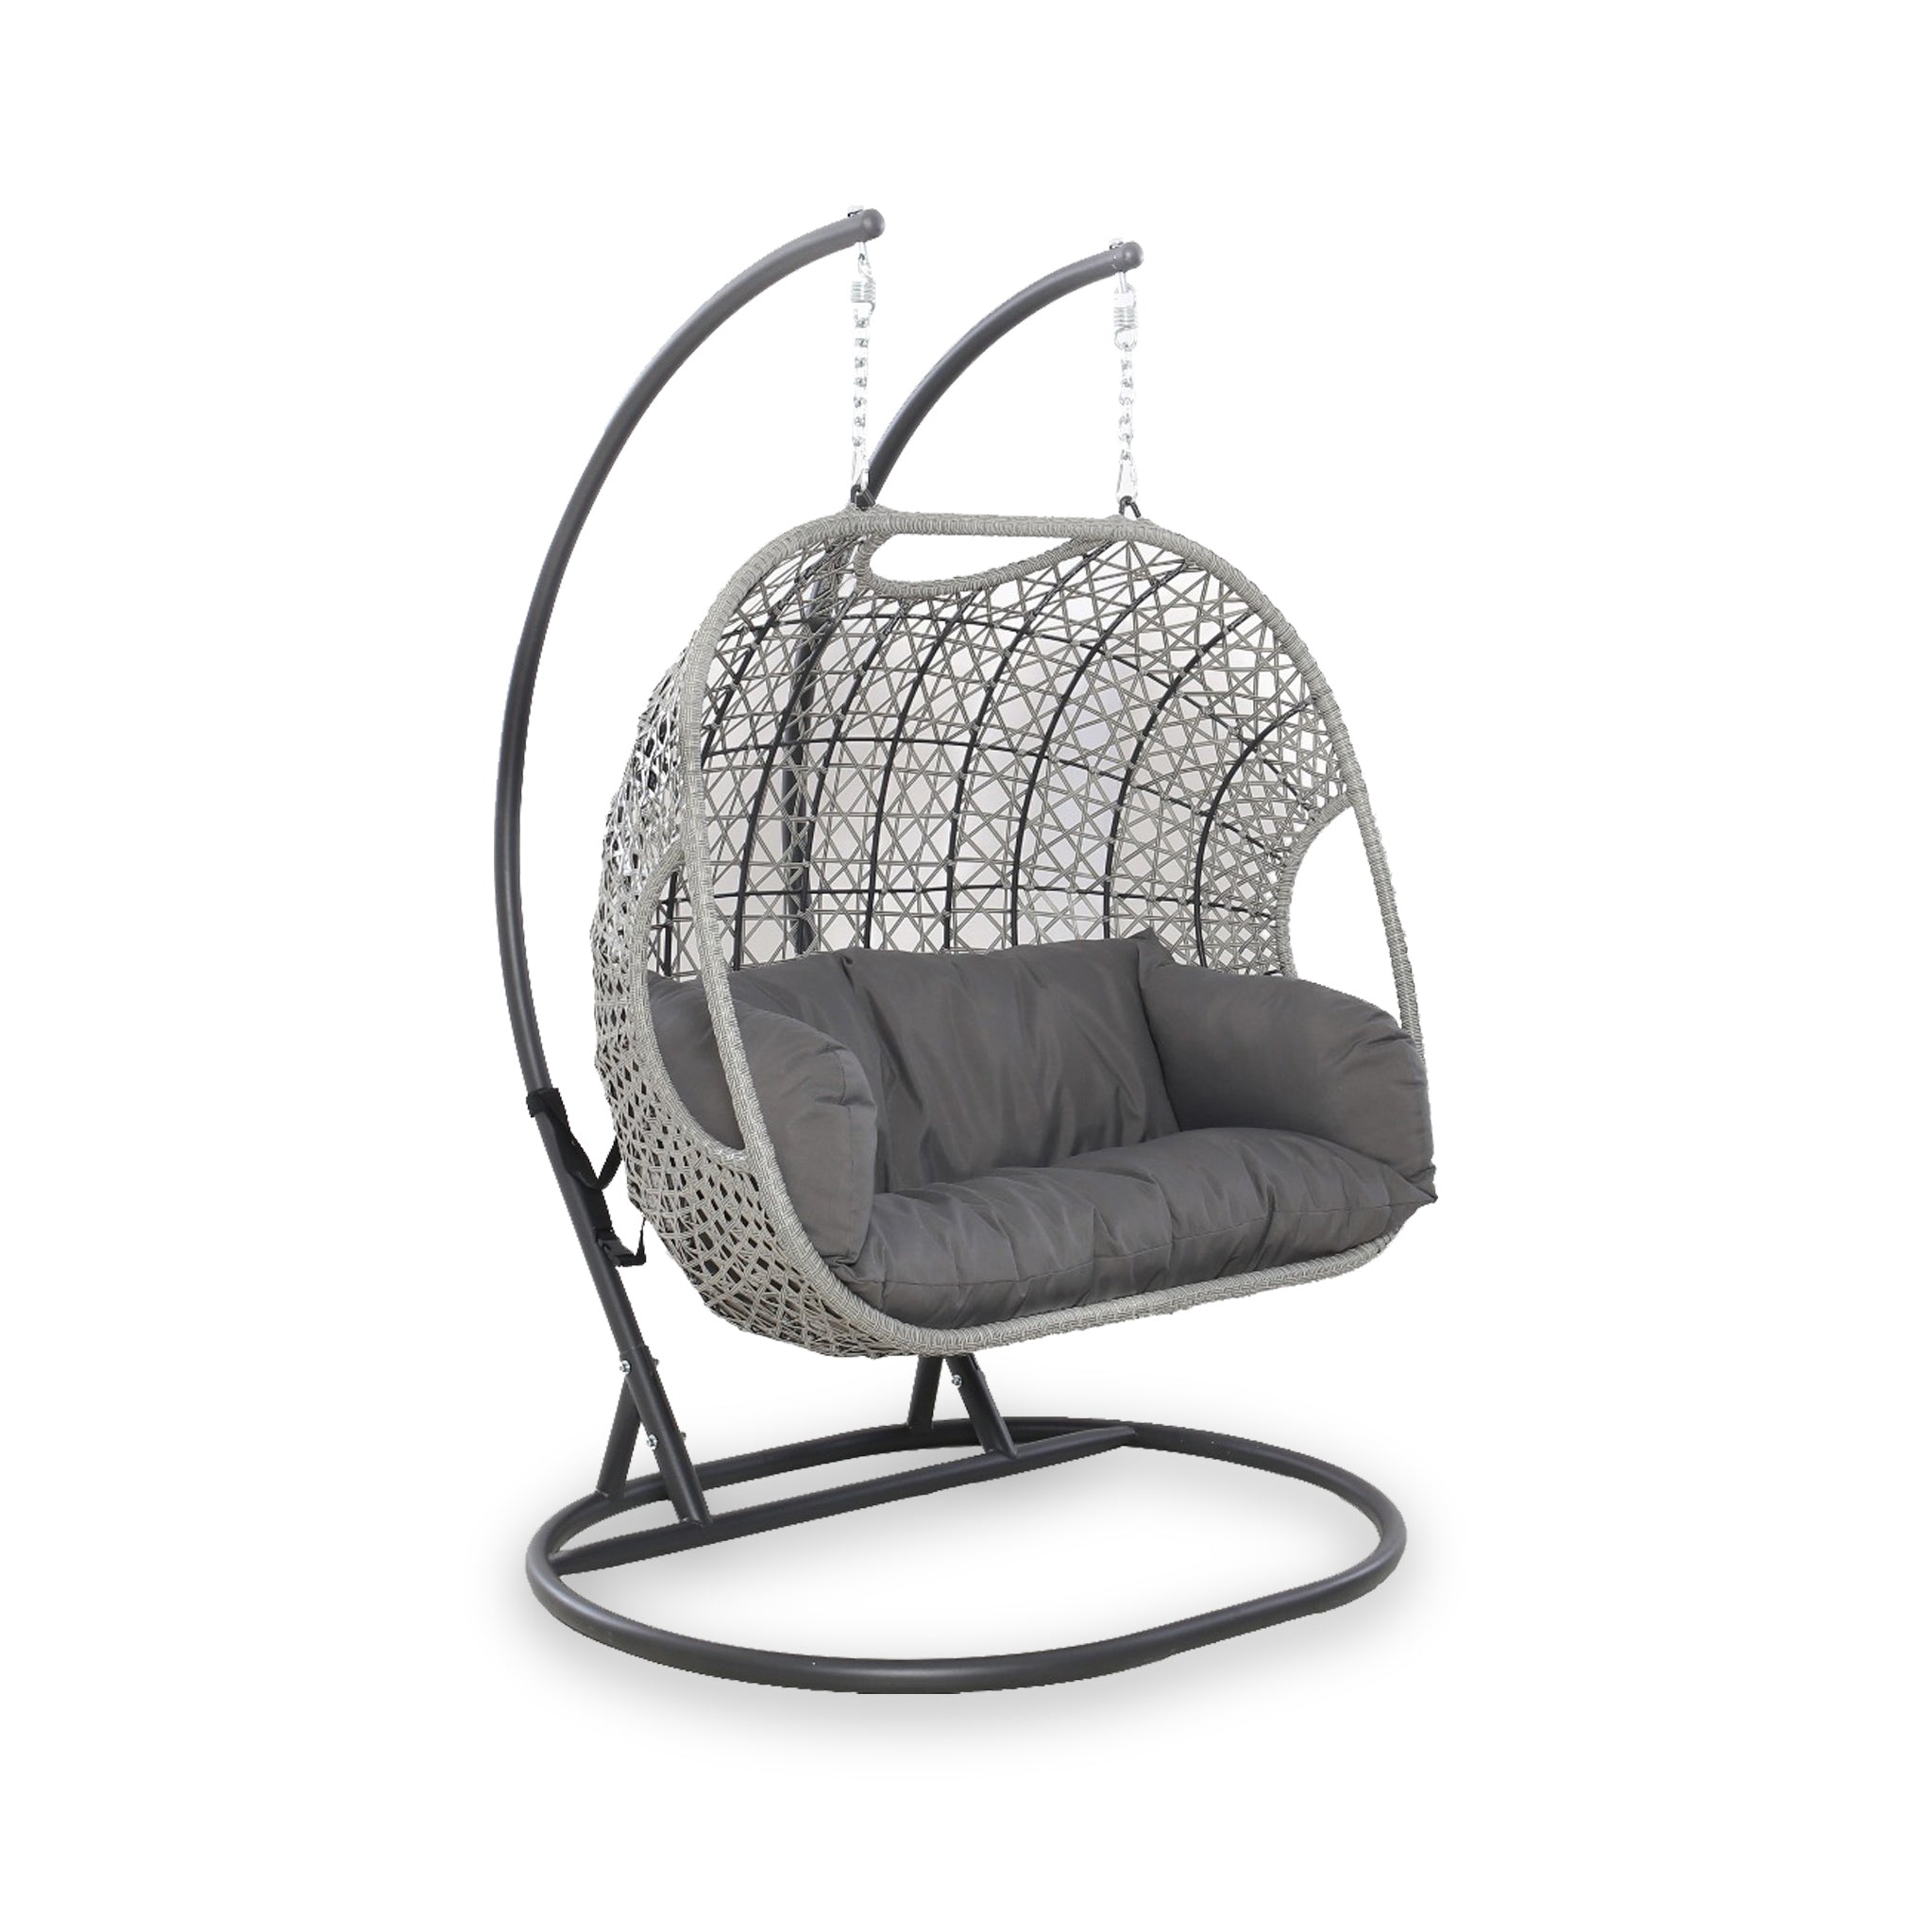 Maze Ascot Grey Double Hanging Egg Chair Outdoor Rattan Swing Seat